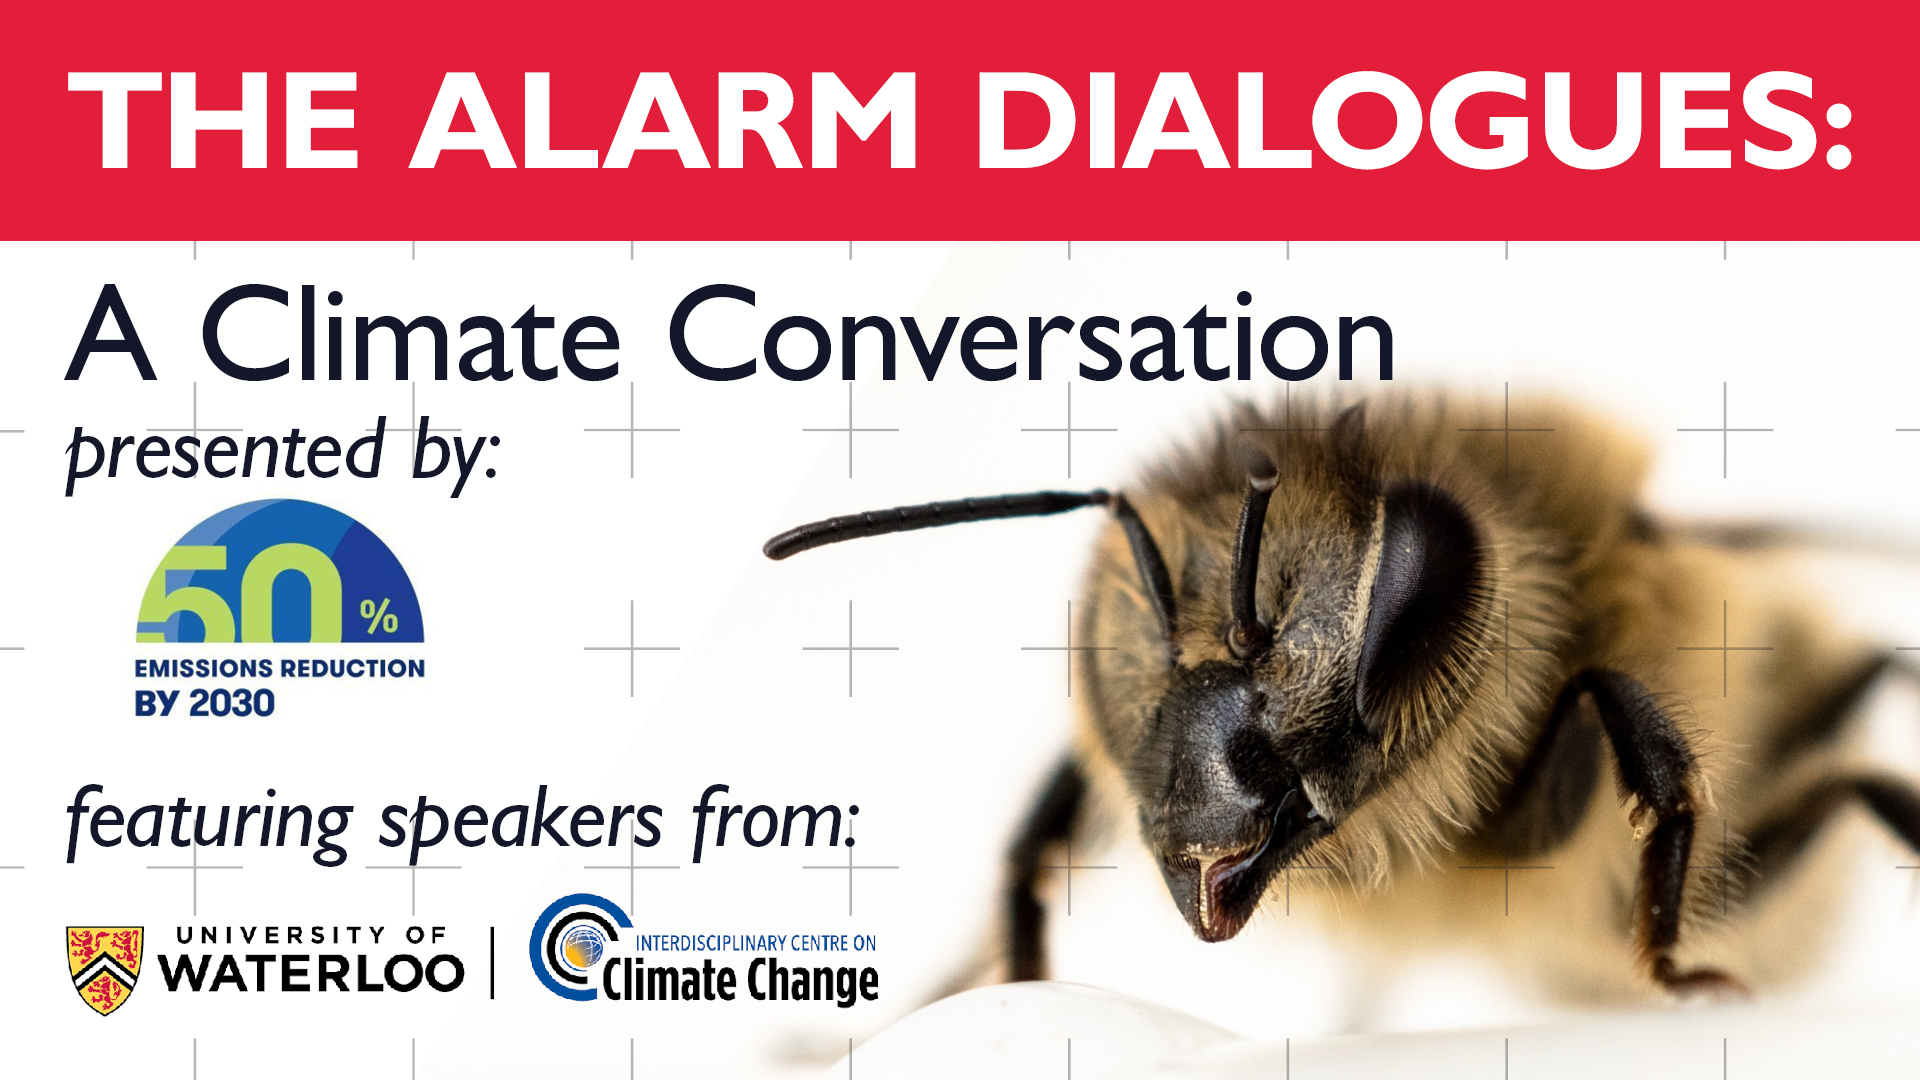 The Alarm Dialogues event poster